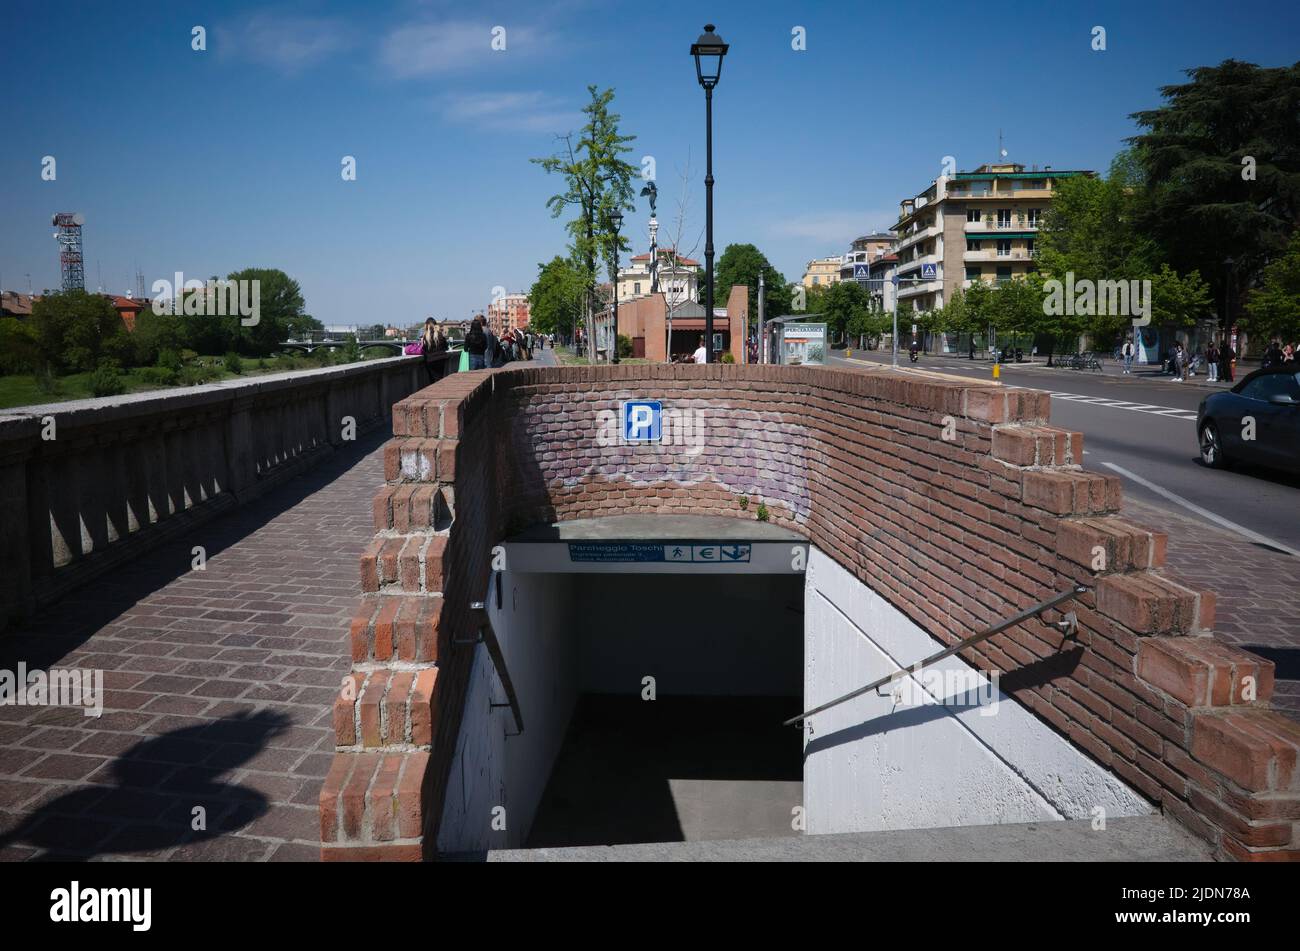 Parma, Italy - May, 2022: Entrance to underground parking and underground pedestrian crossing made of bricks on embankment on Viale Toschi street Stock Photo